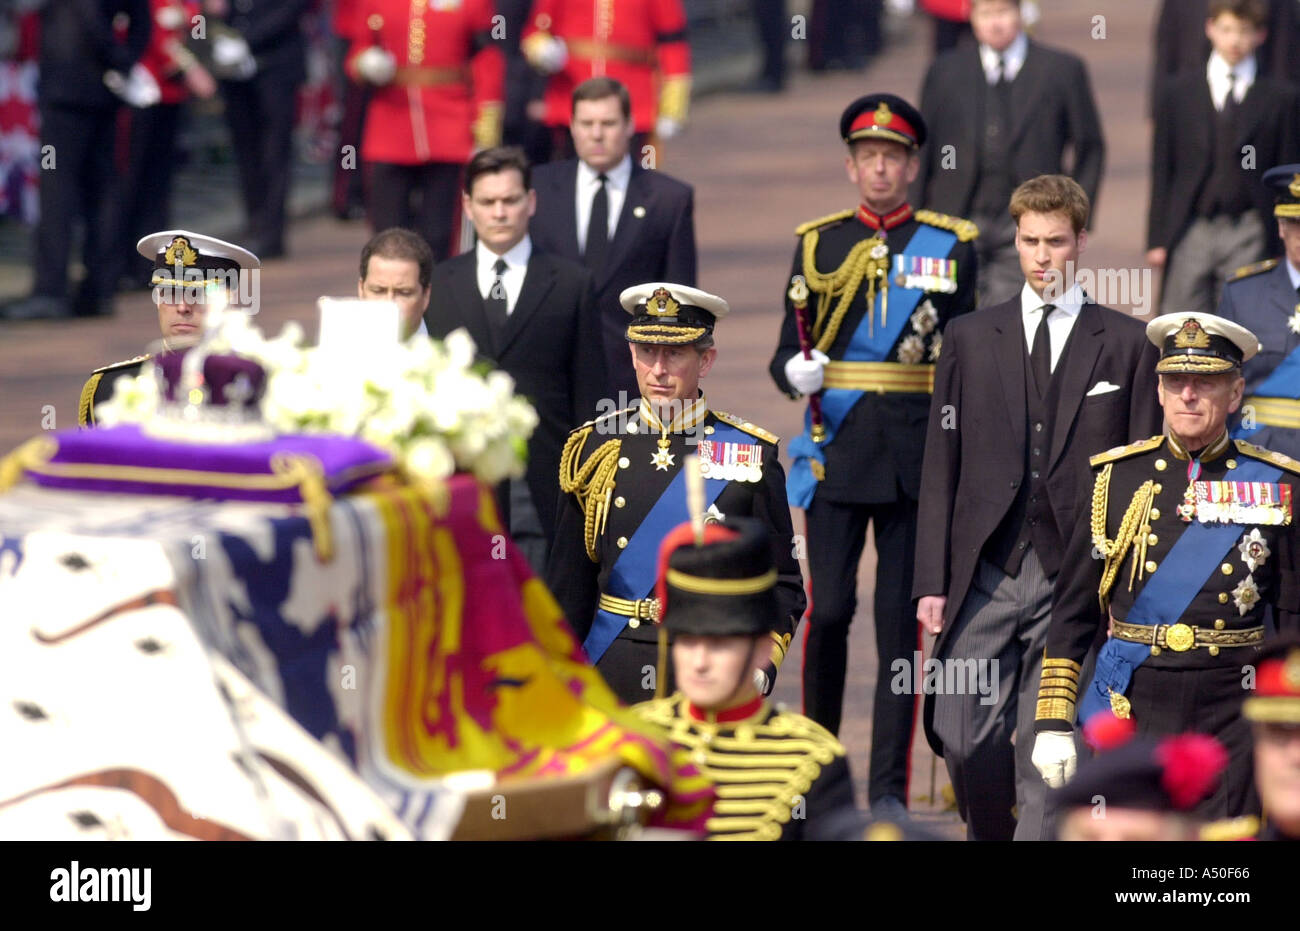 Prince Charles and Prince William march solemnly behind the Queen Mothers coffin during her funeral procession Stock Photo